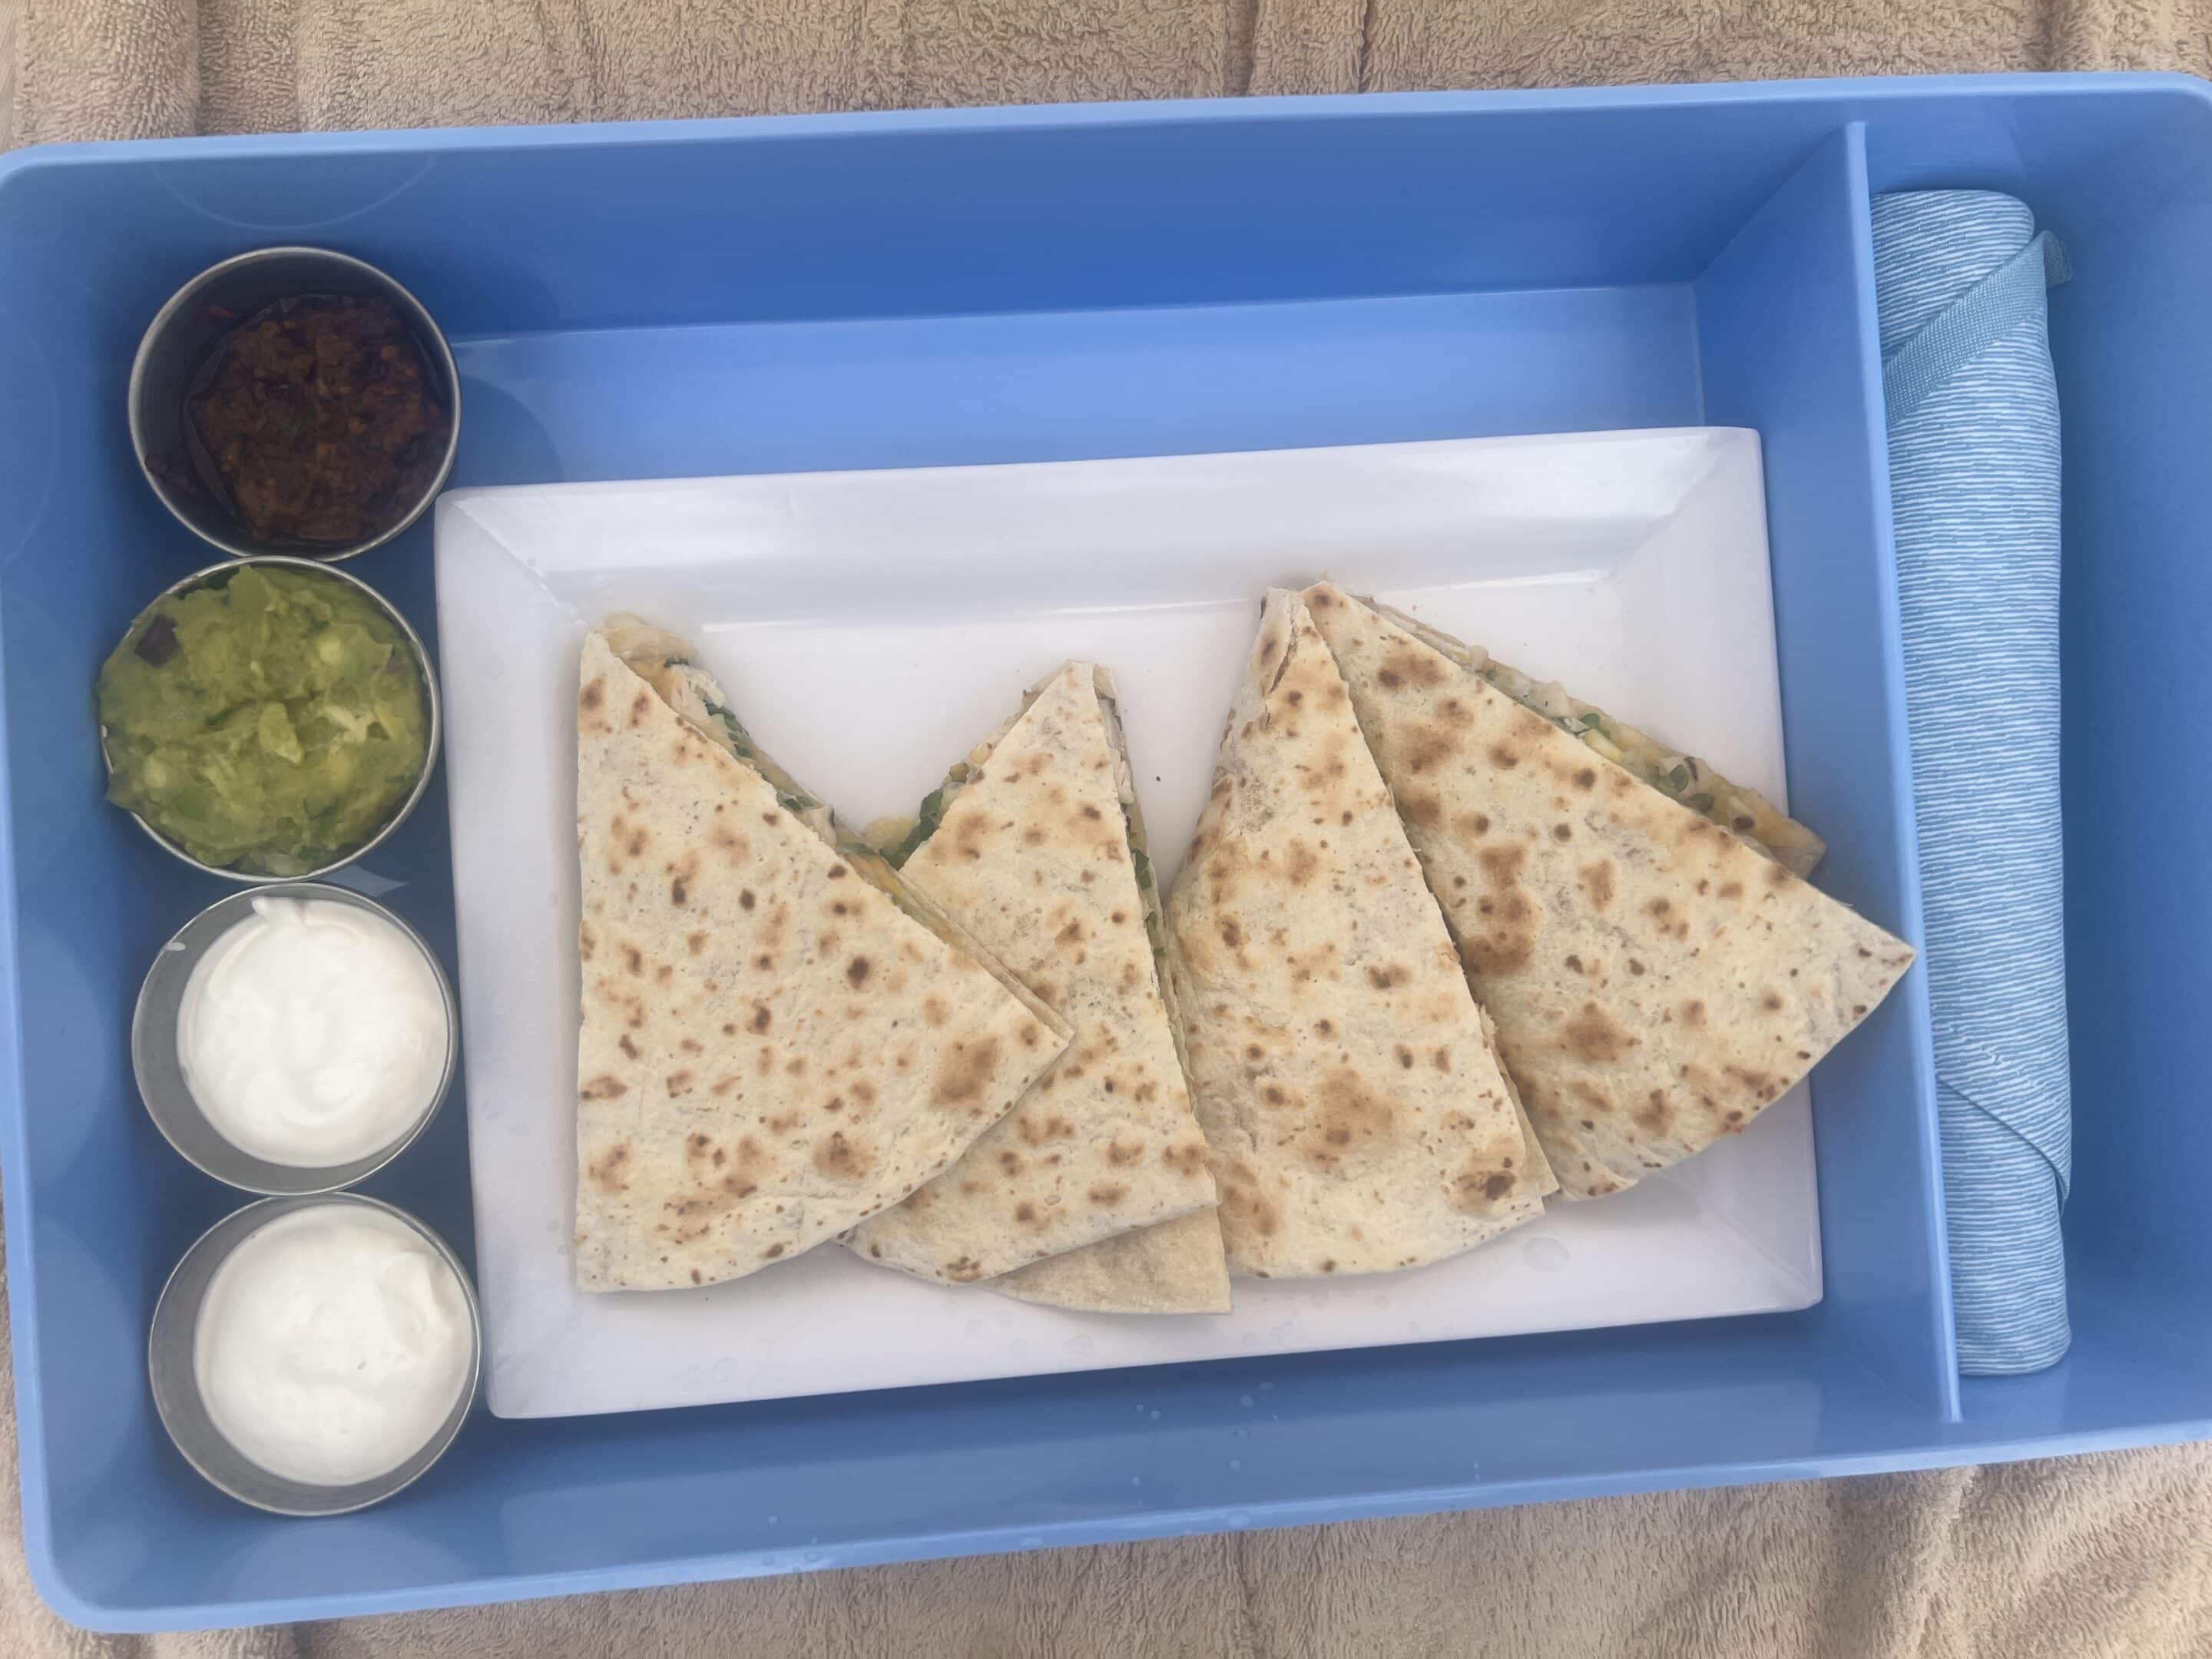 a plate of quesadillas and condiments